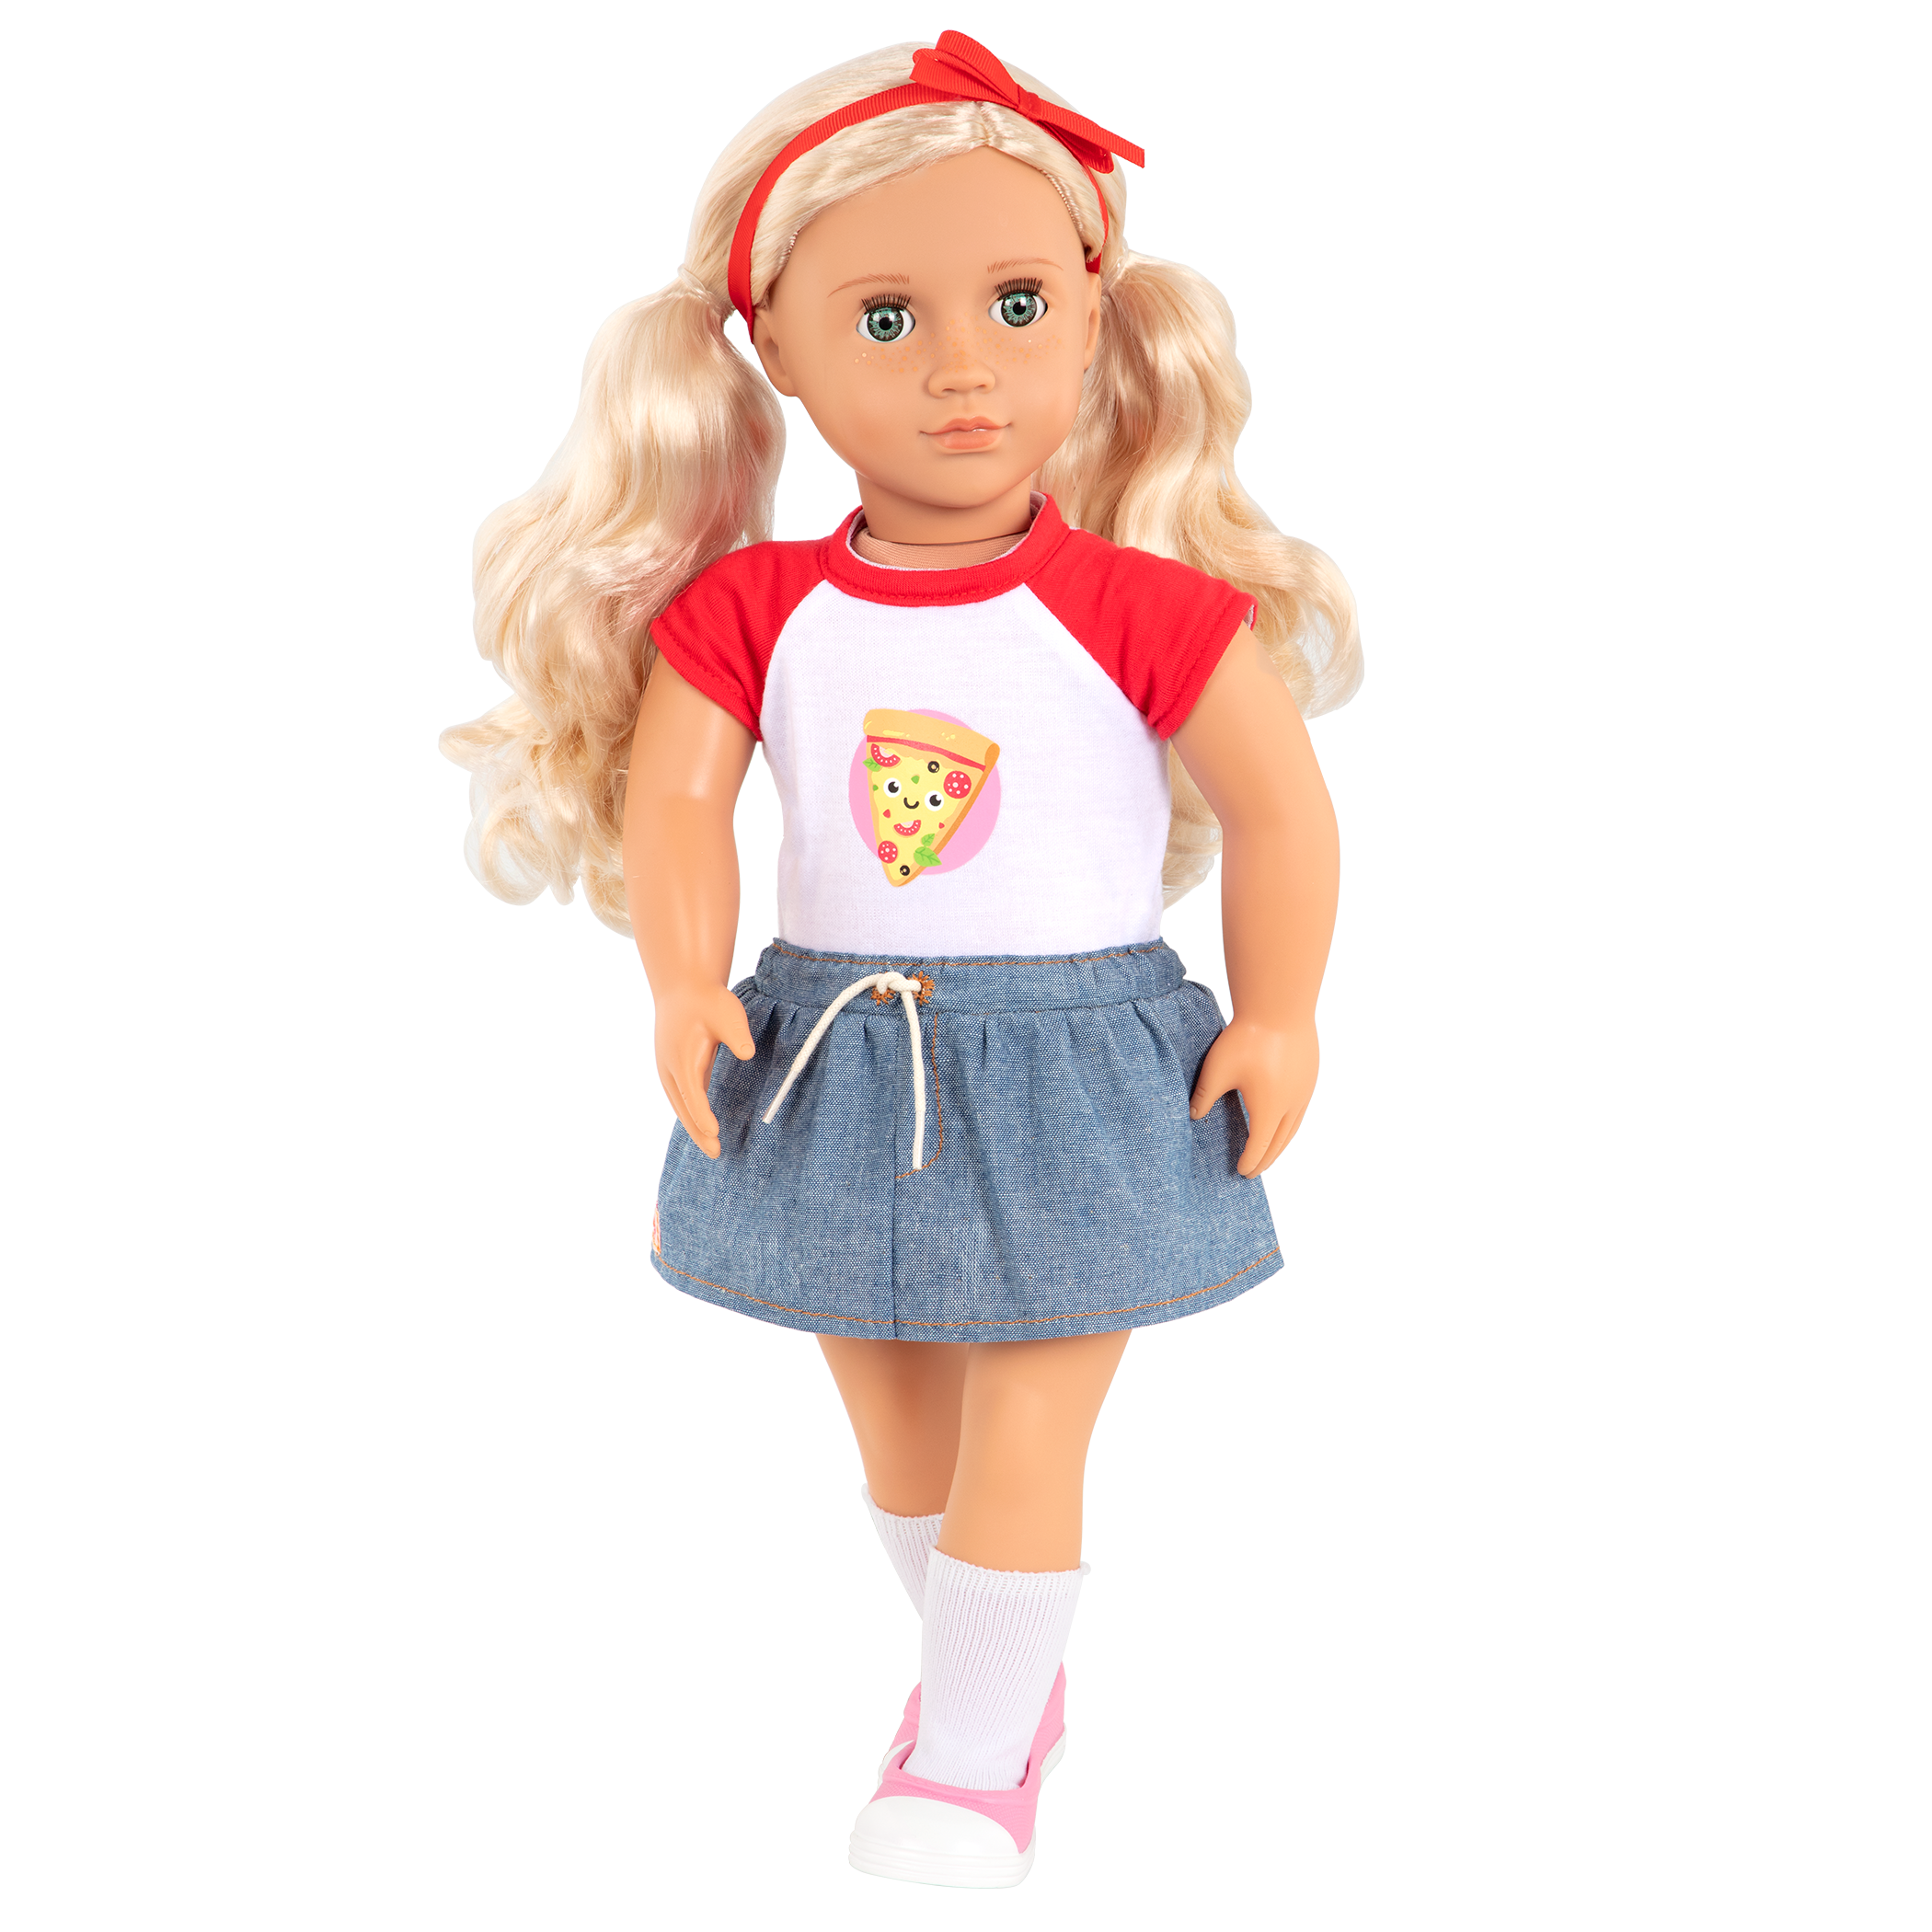 https://ourgeneration.com/wp-content/uploads/BD31268_Our-Generation-18-inch-doll-Jolene-MAIN.png